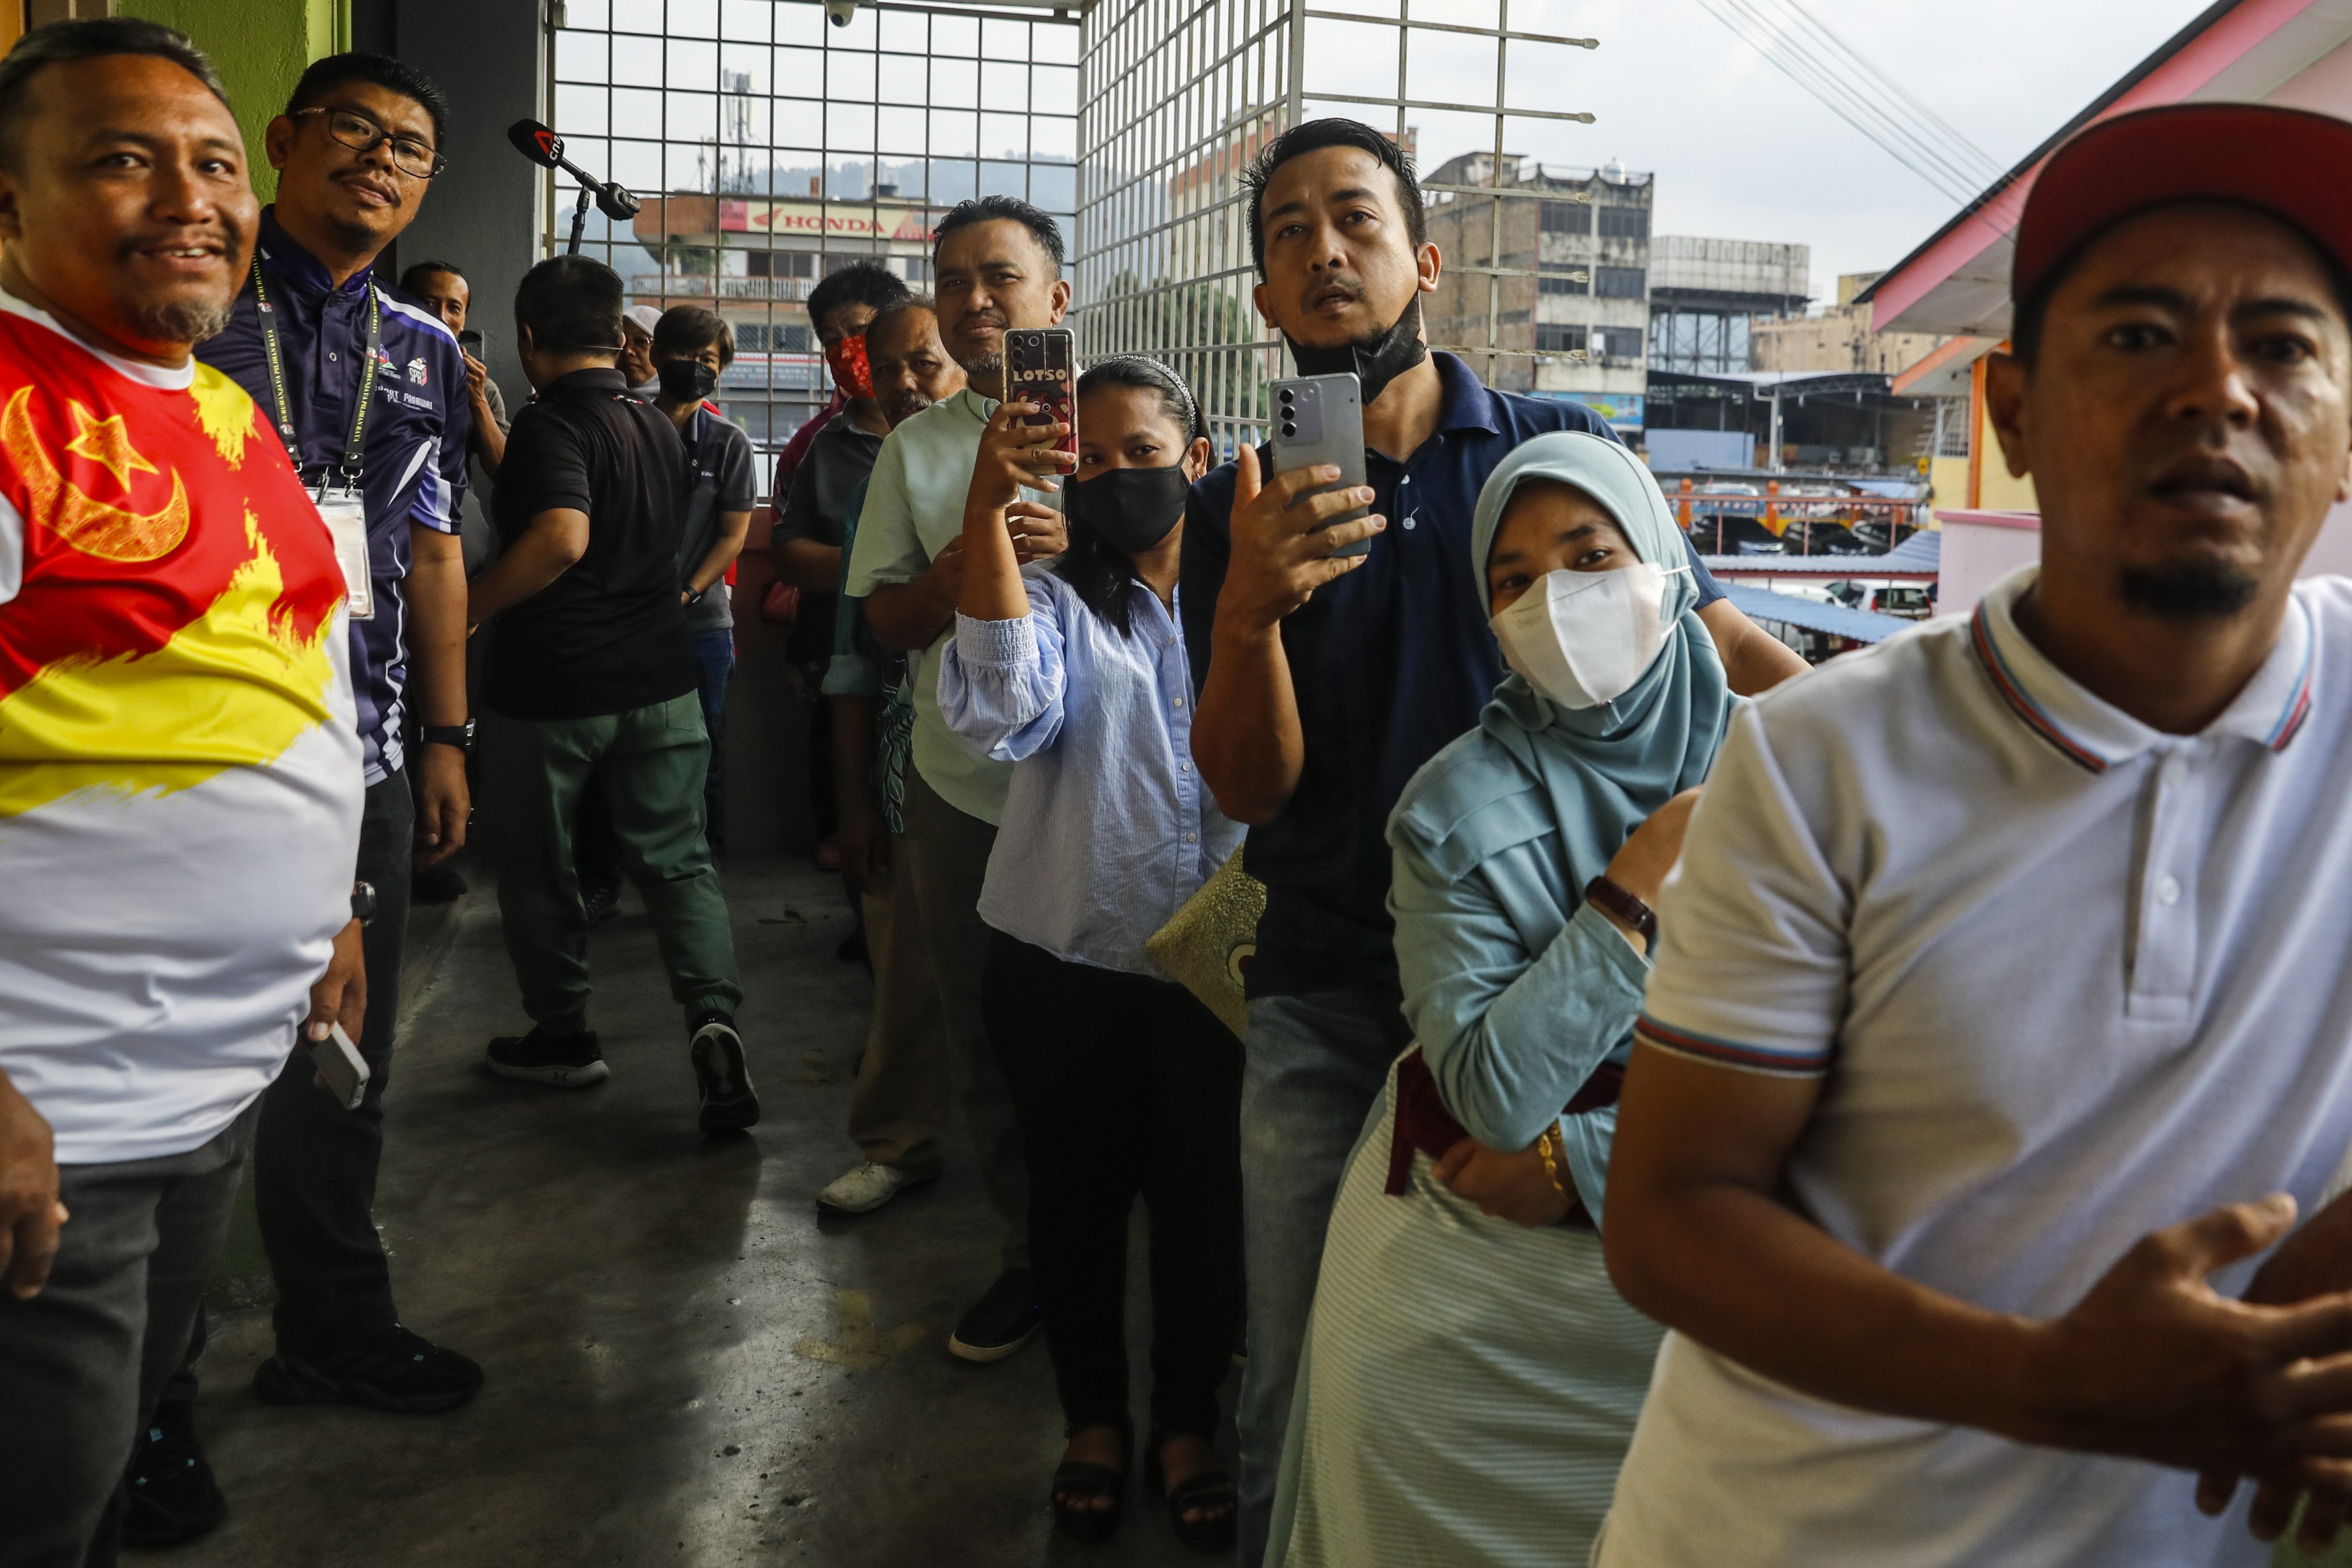 Malaysians wait to cast their votes at a polling station in Selayang, Selangor, on Saturday. Photo: EPA-EFE